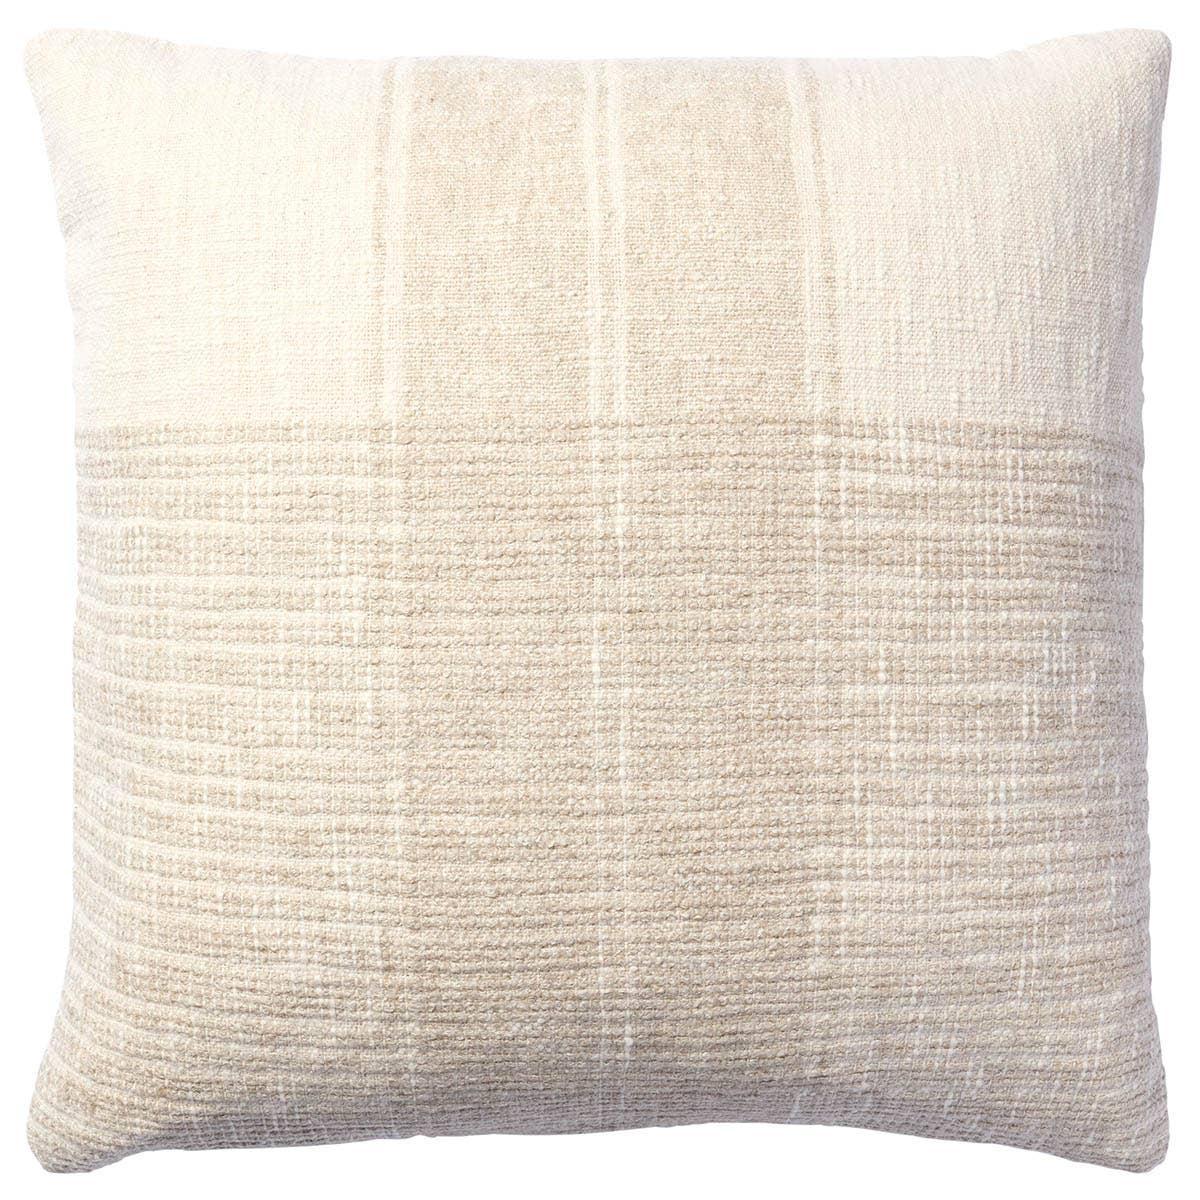 The handcrafted Cueva throw pillow delights with a striped plaid design in hues of cream and beige. The neutral tones establish a versatile accent piece that works in any indoor space.Indoor Pillow Amethyst Home provides interior design, new home construction design consulting, vintage area rugs, and lighting in the Winter Garden metro area.